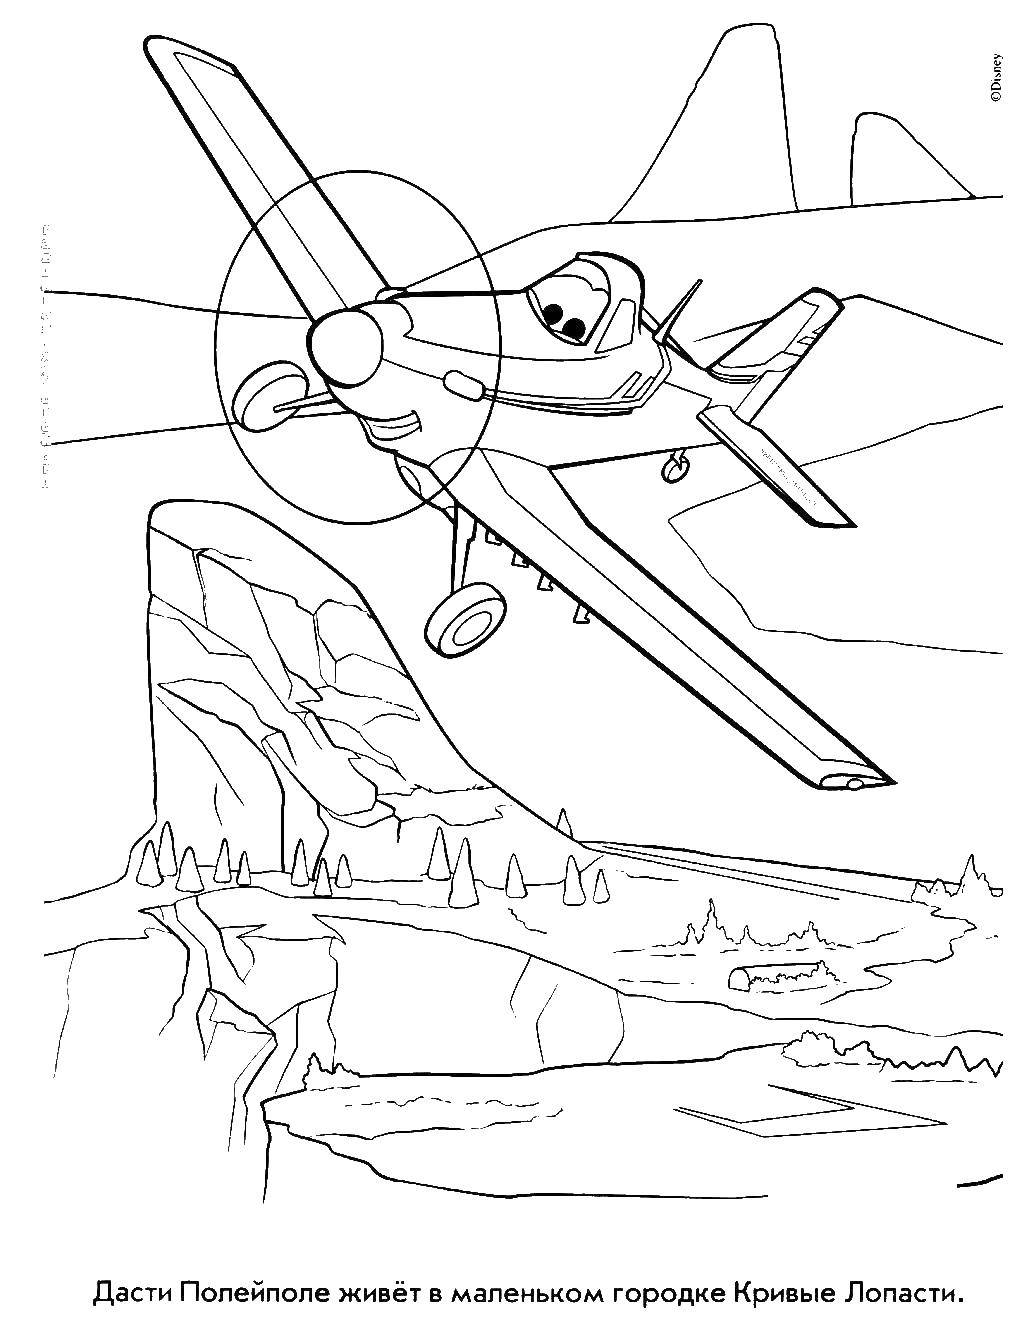 Coloring Dusty the plane. Category coloring. Tags:  The Plane, Dusty.